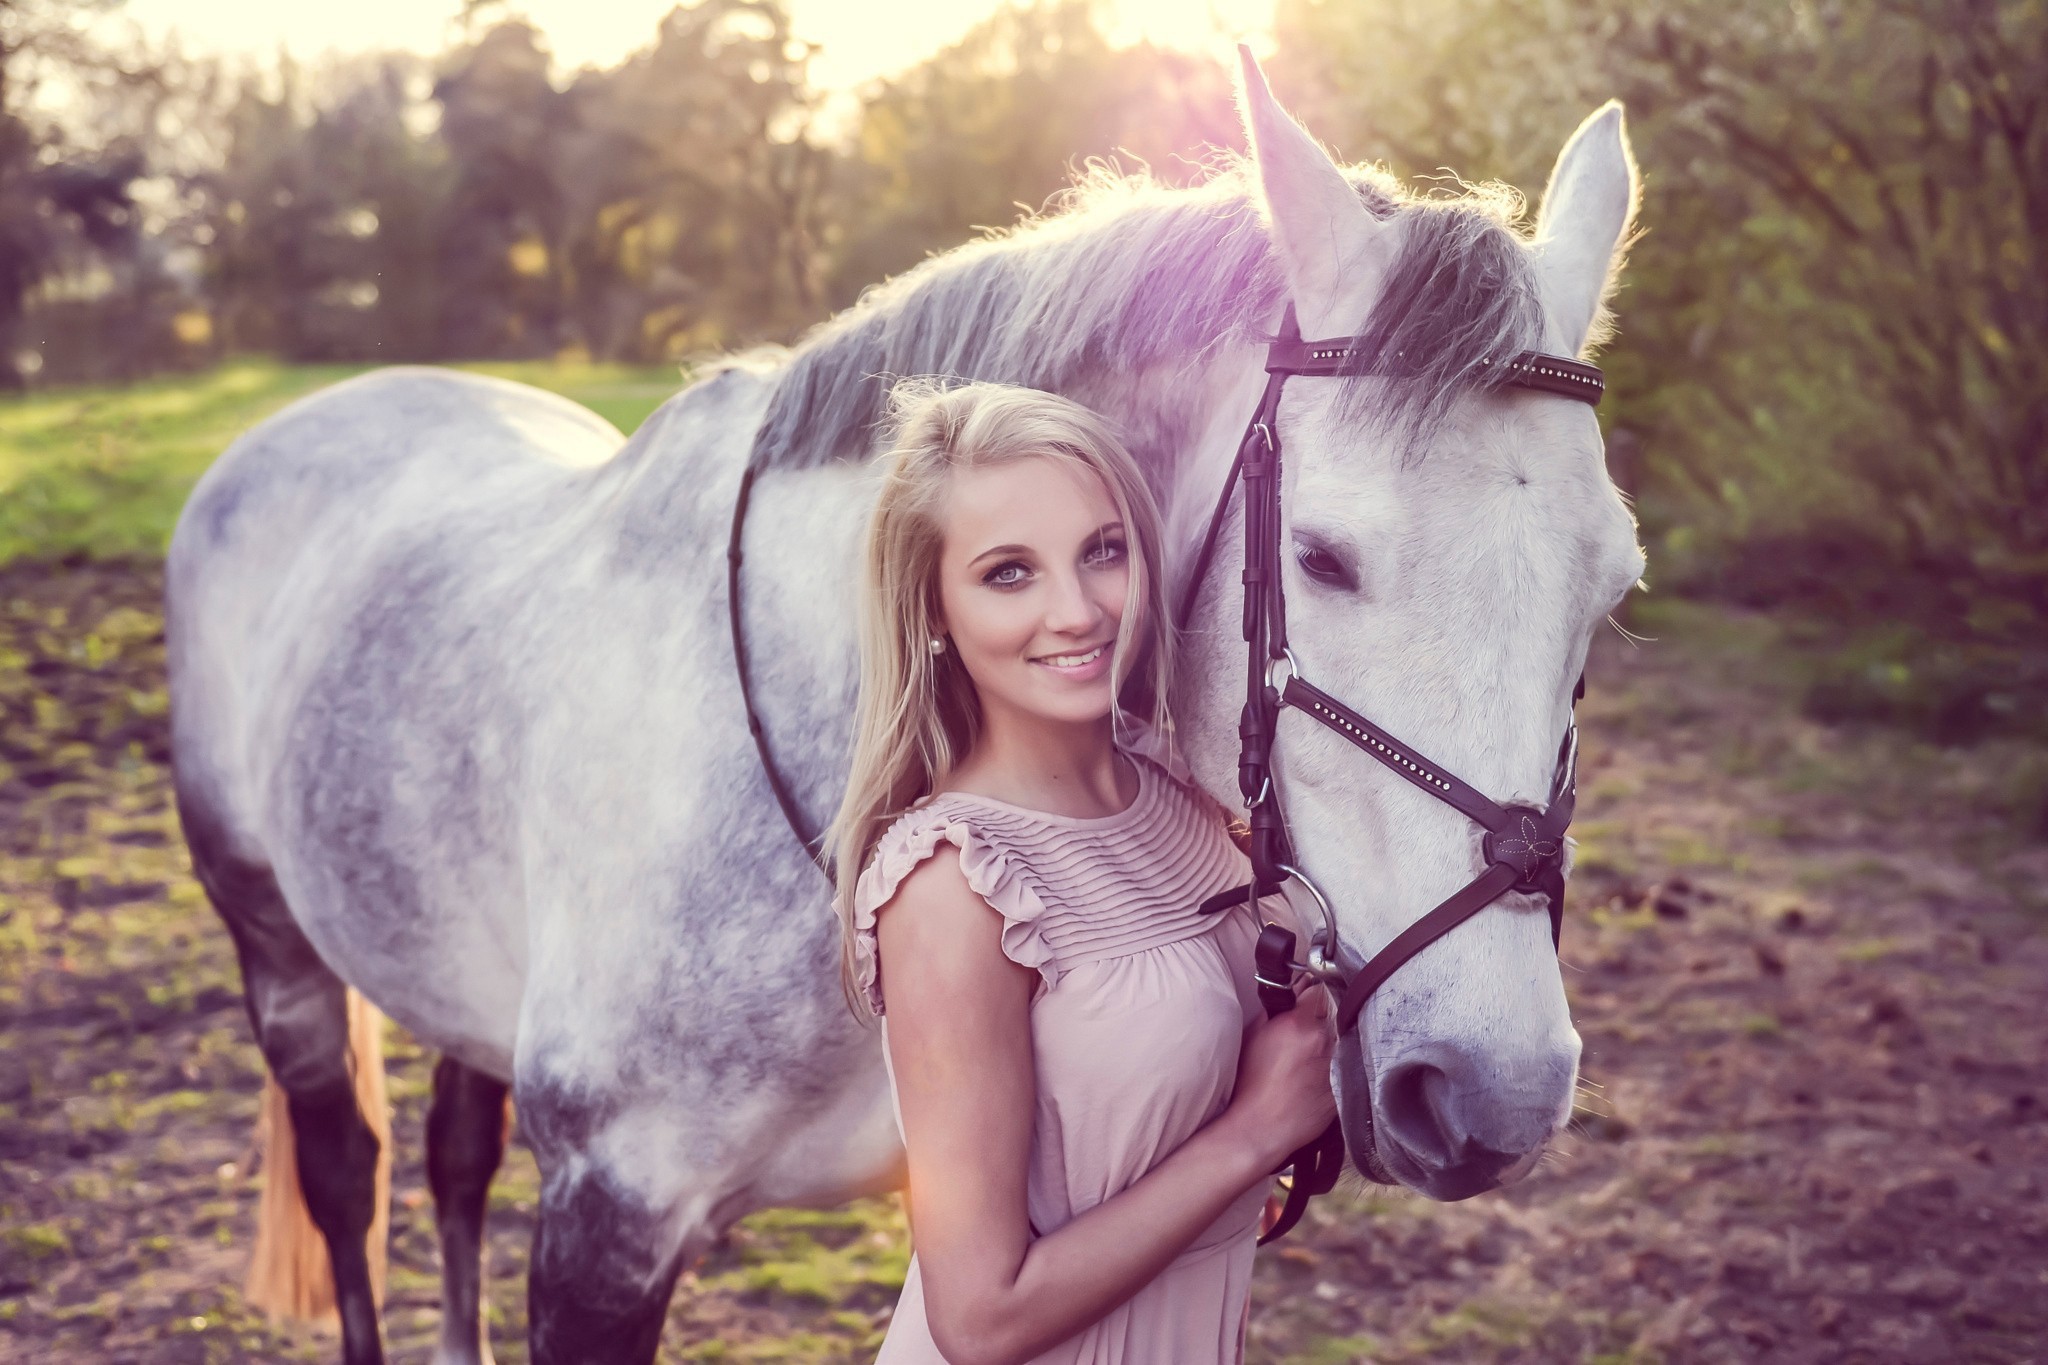 People 2048x1365 women blonde horse women with horse dress smiling pearl earrings women outdoors animals mammals looking at viewer model